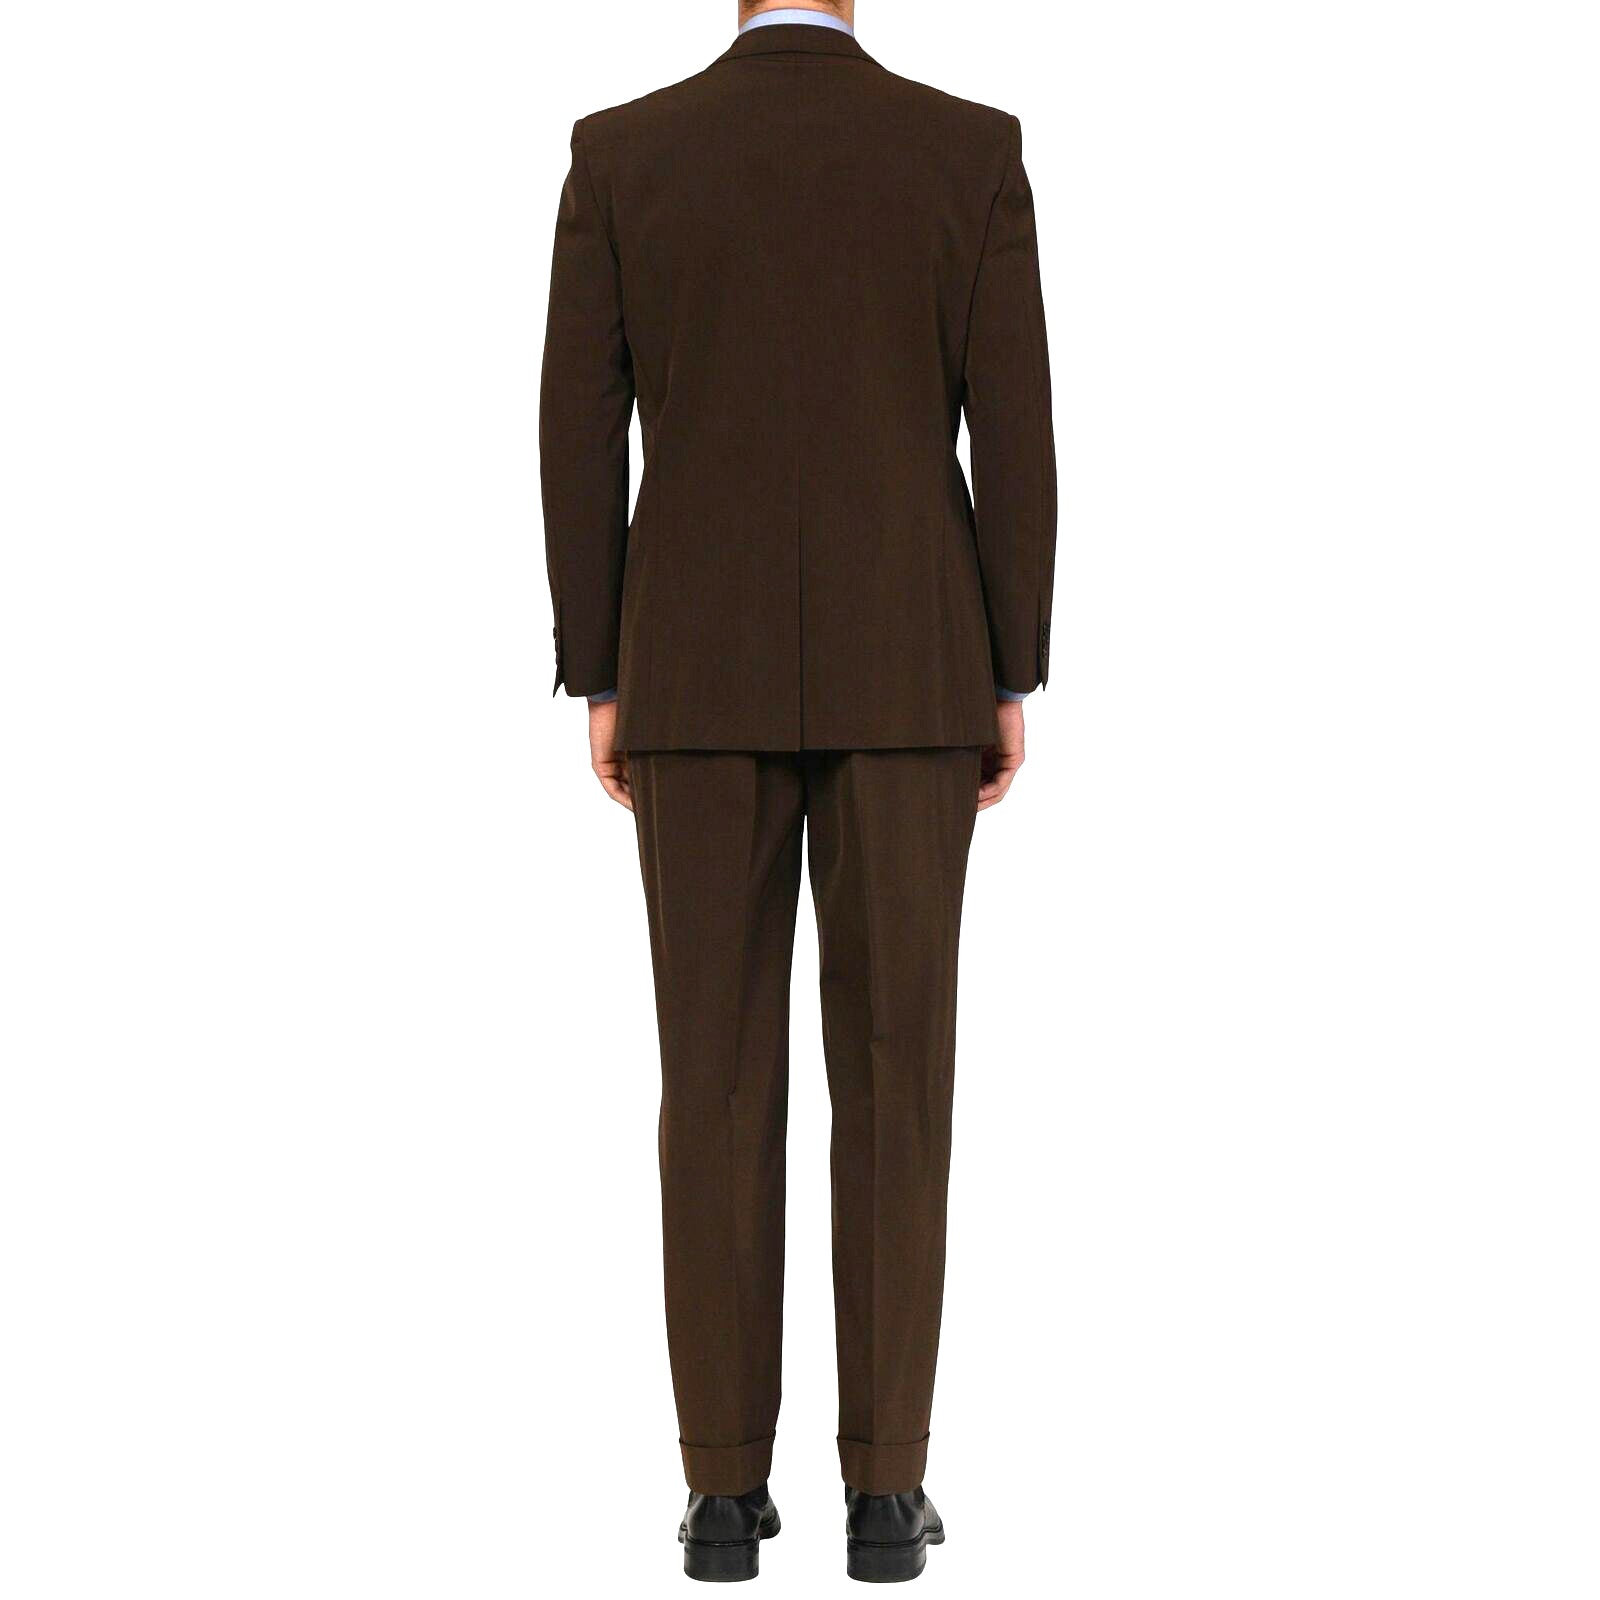 D'AVENZA Roma Handmade Brown Polyester Suit EU 52 NEW US 42 D'AVENZA